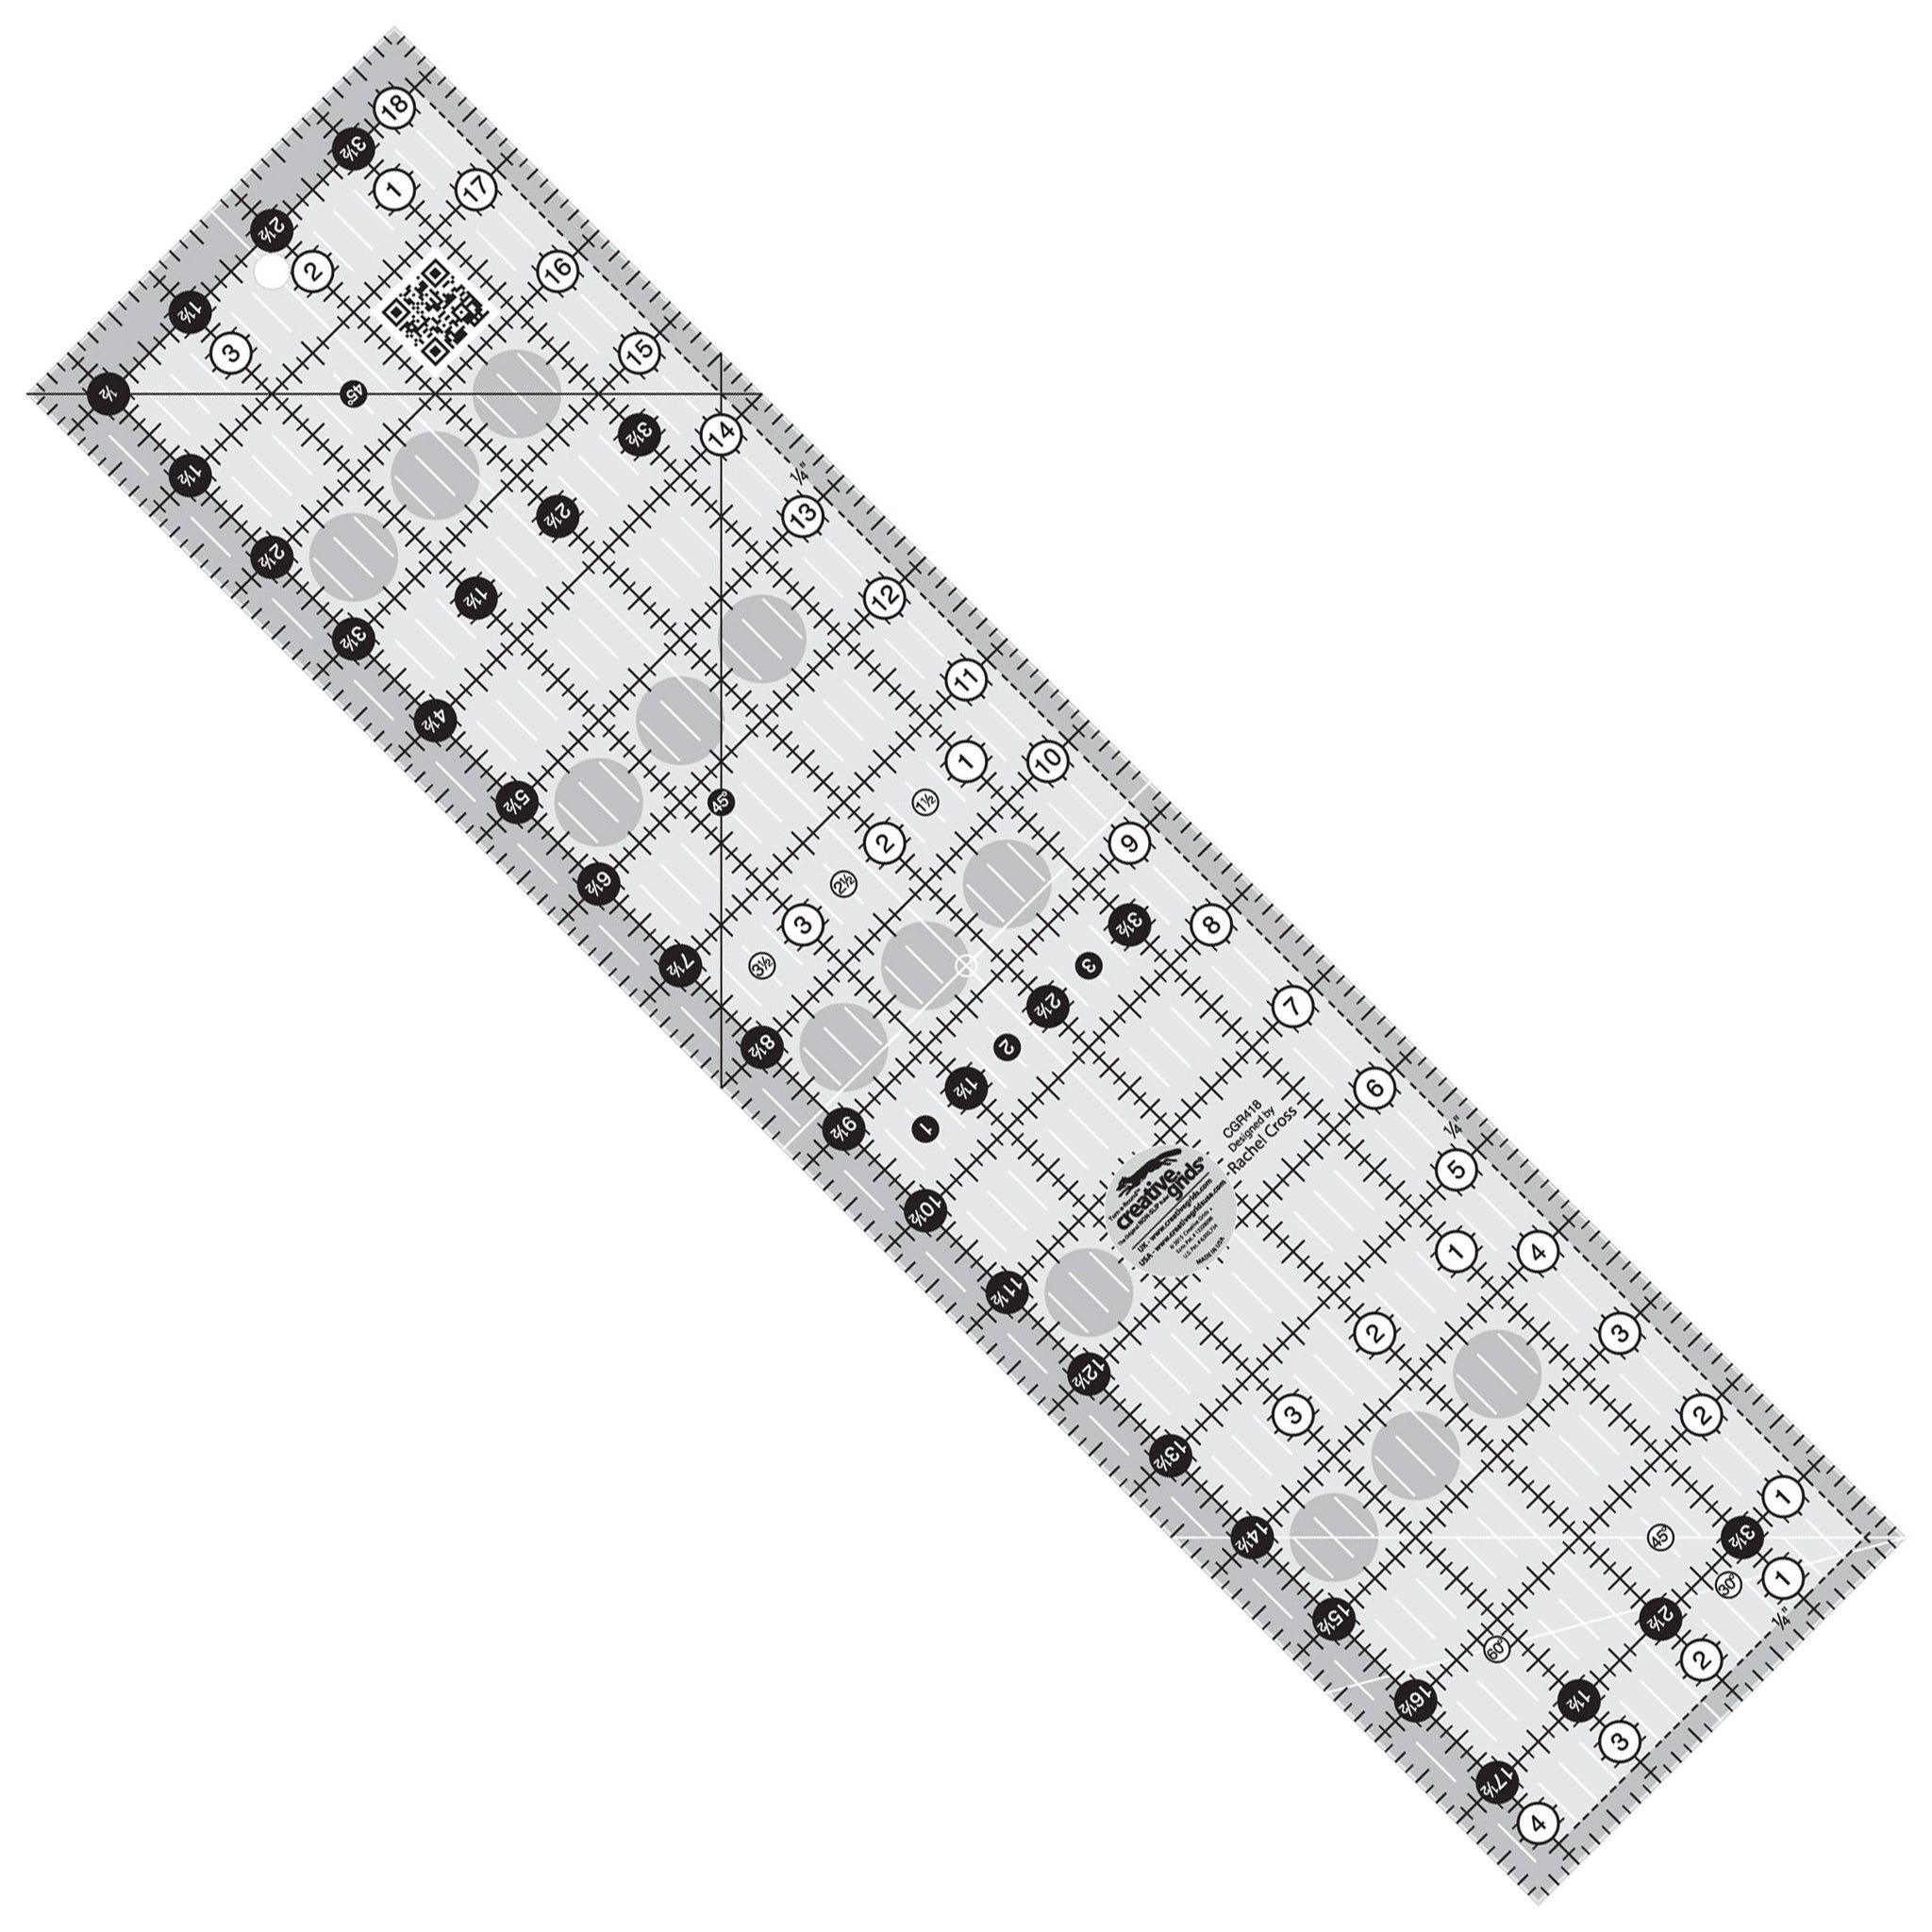 Creative Grids 4-1/2-Inch X 18-1/2-Inch Quilt Ruler (CGR418)